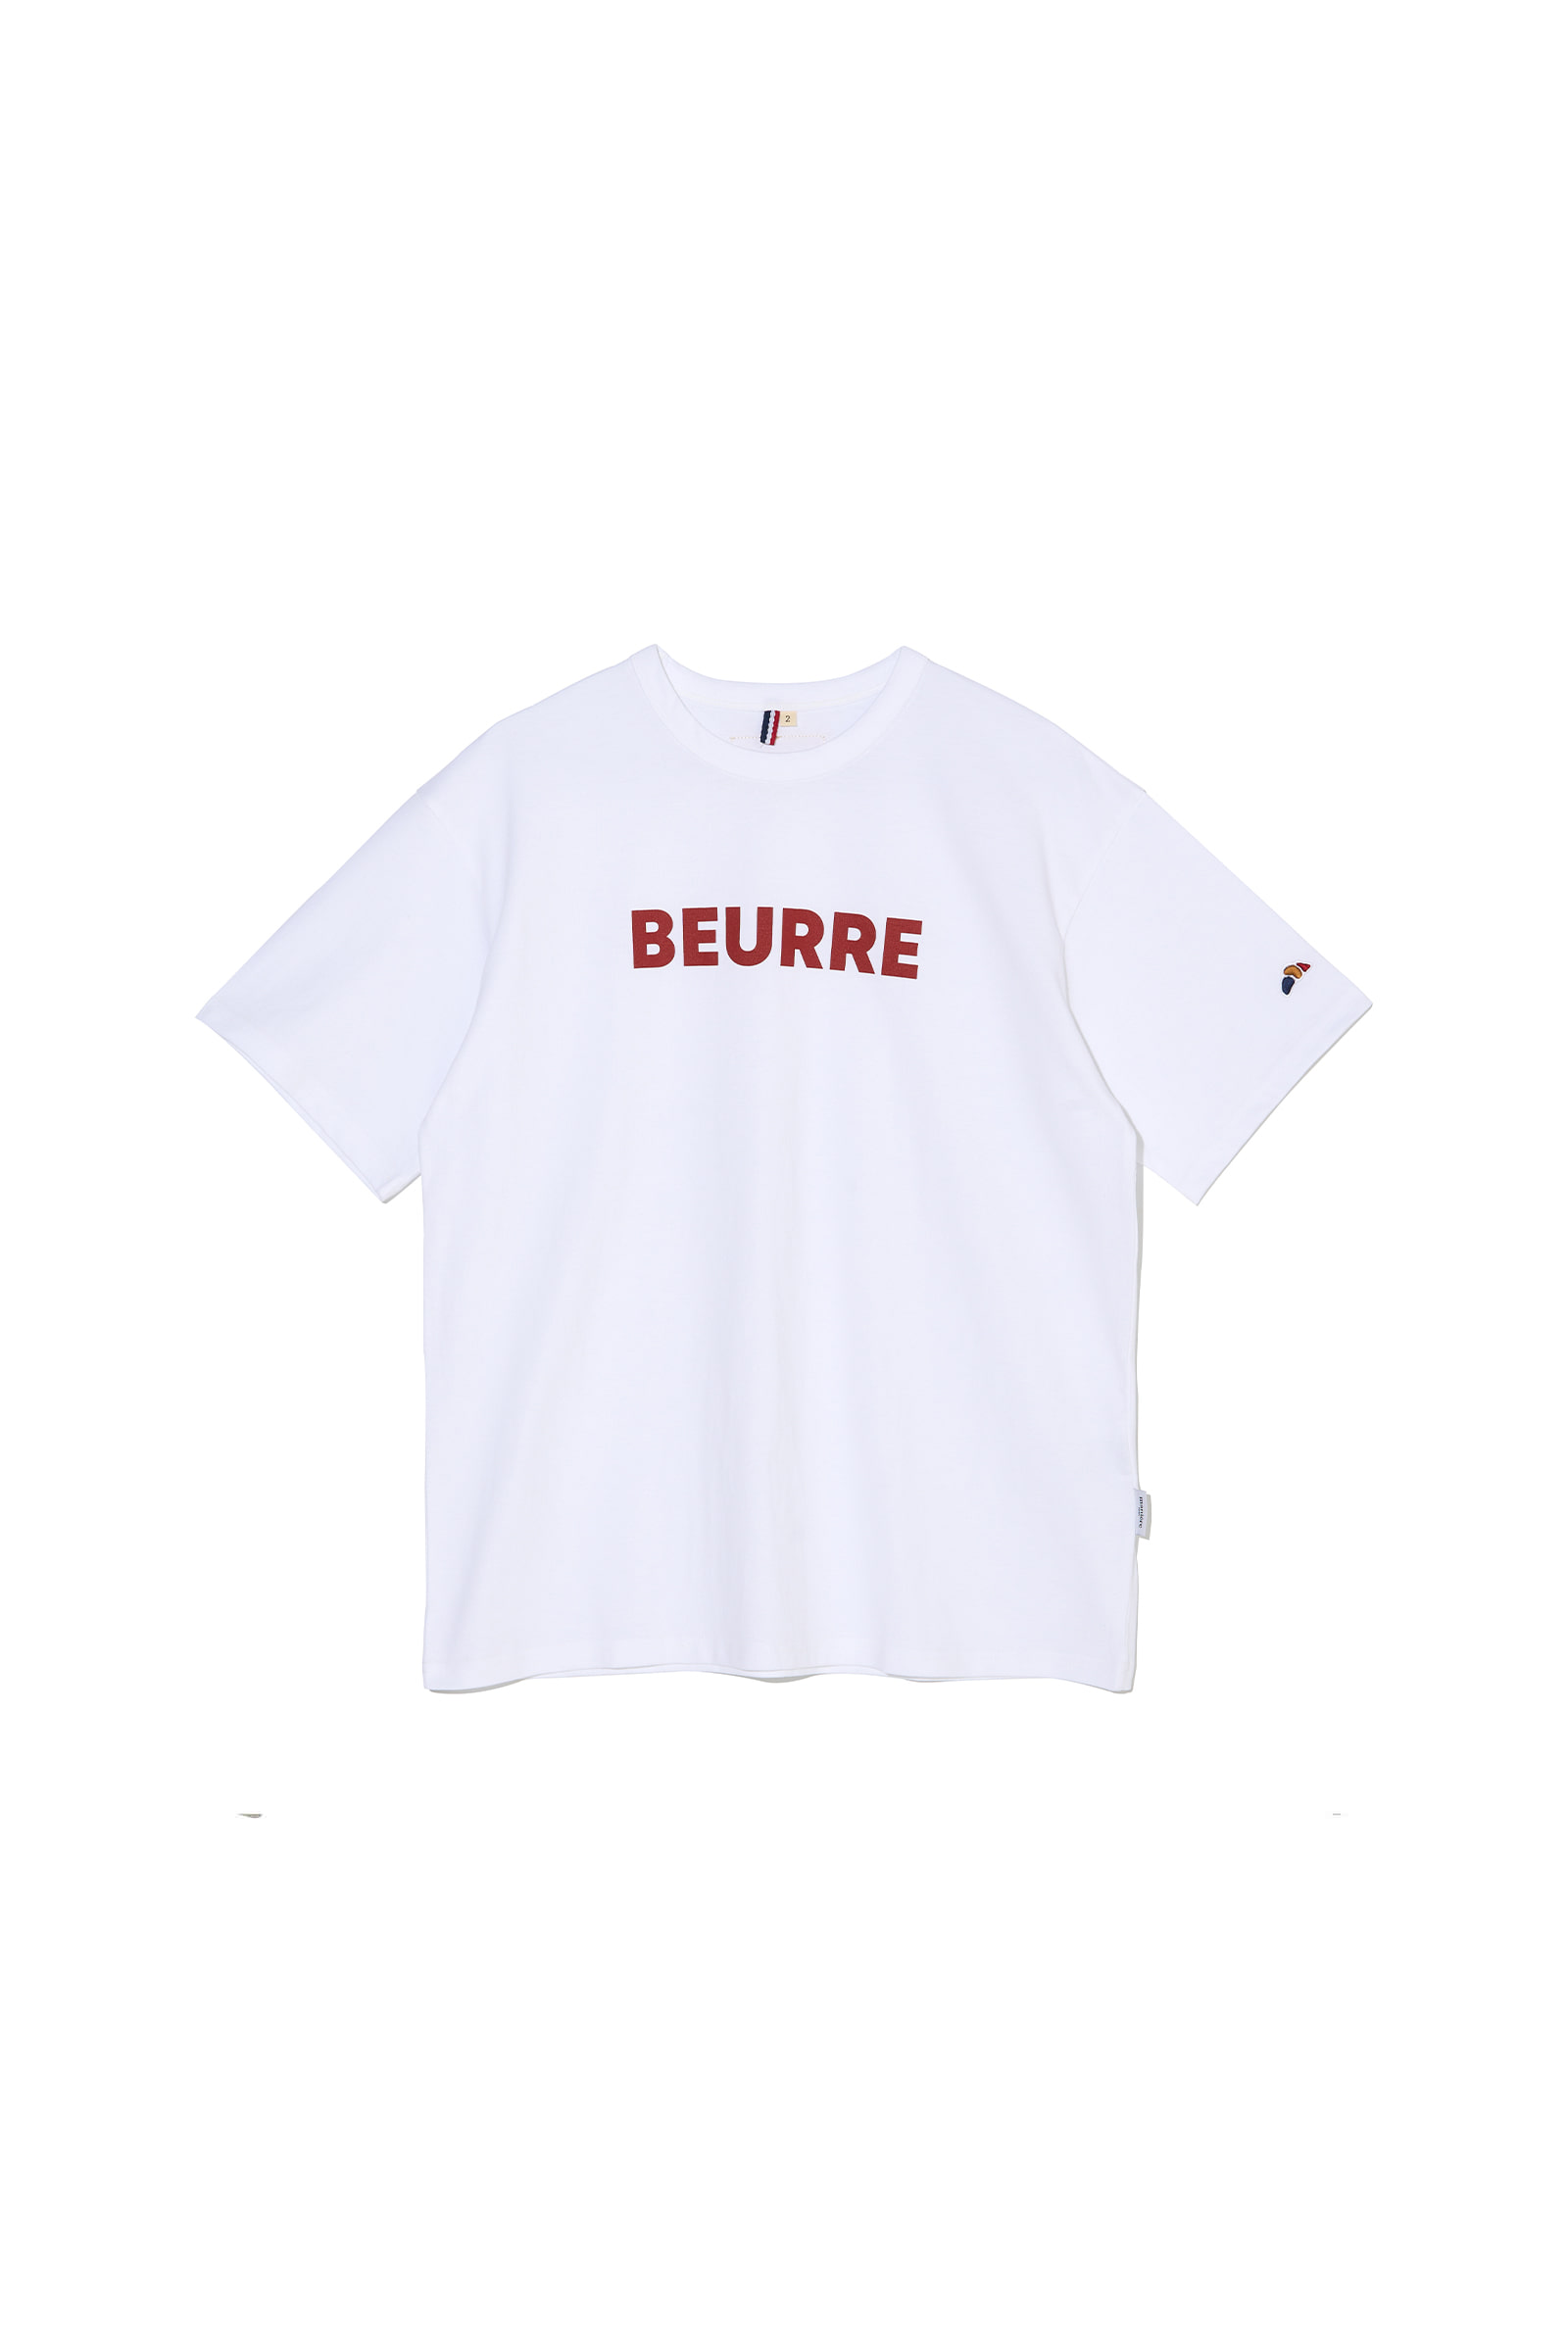 ep.6 BEURRE T-shirts (White)